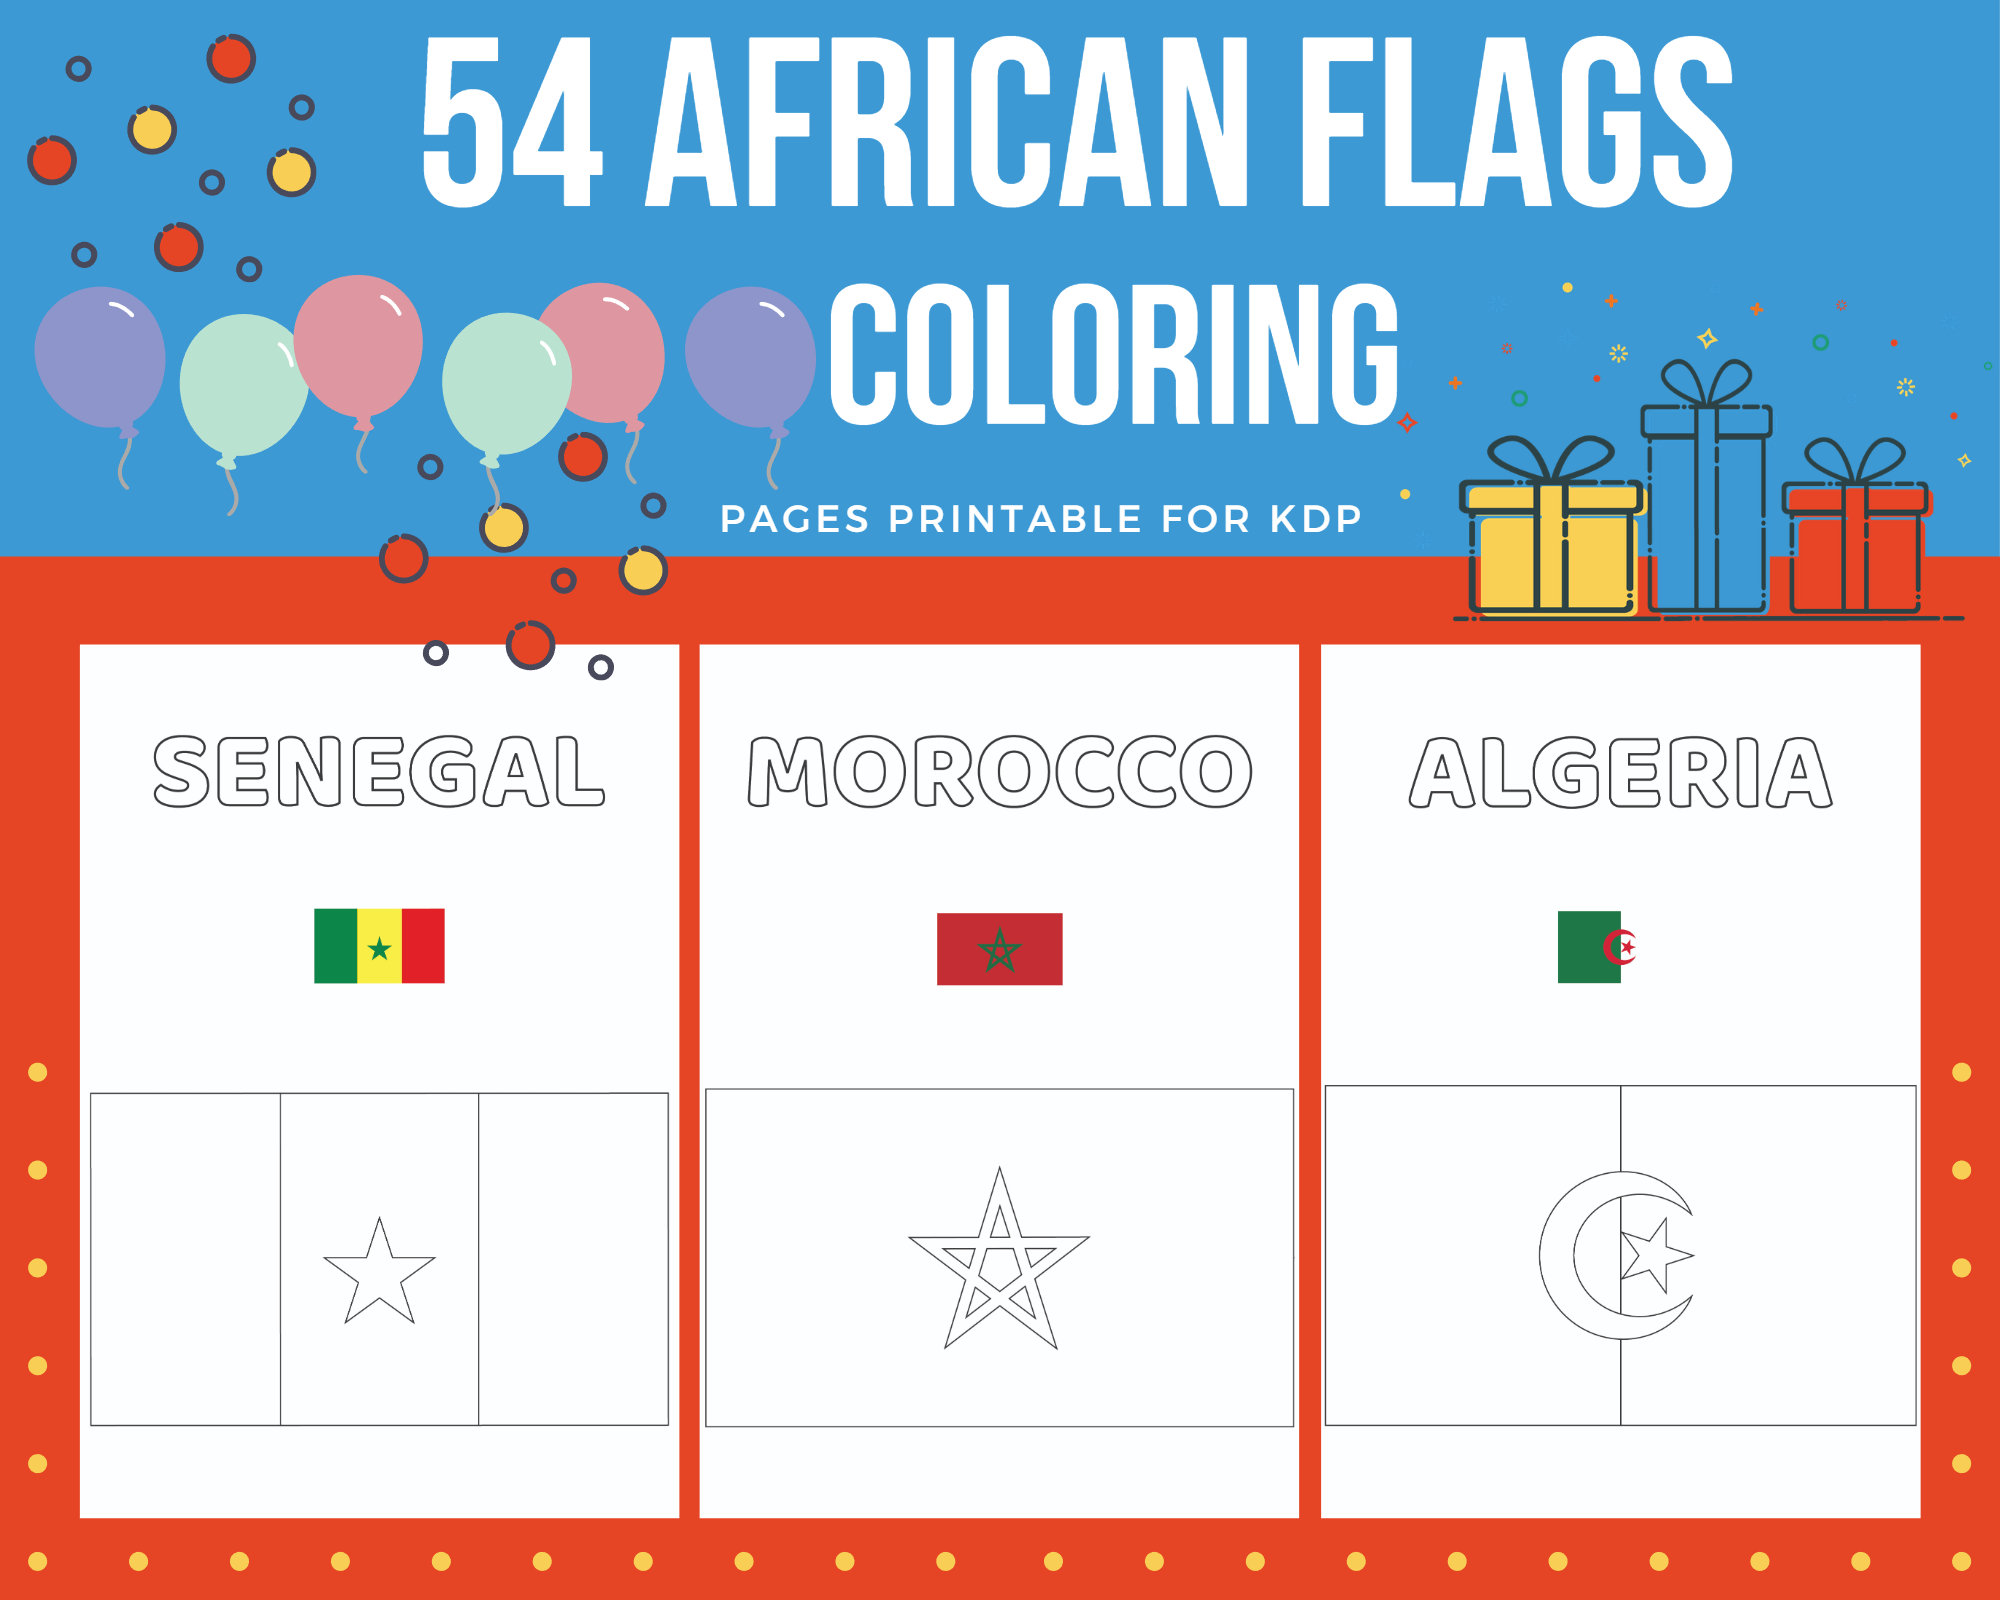 African flags coloring pages printable for kids pdf file us letter instant download kdp coloring book for kids